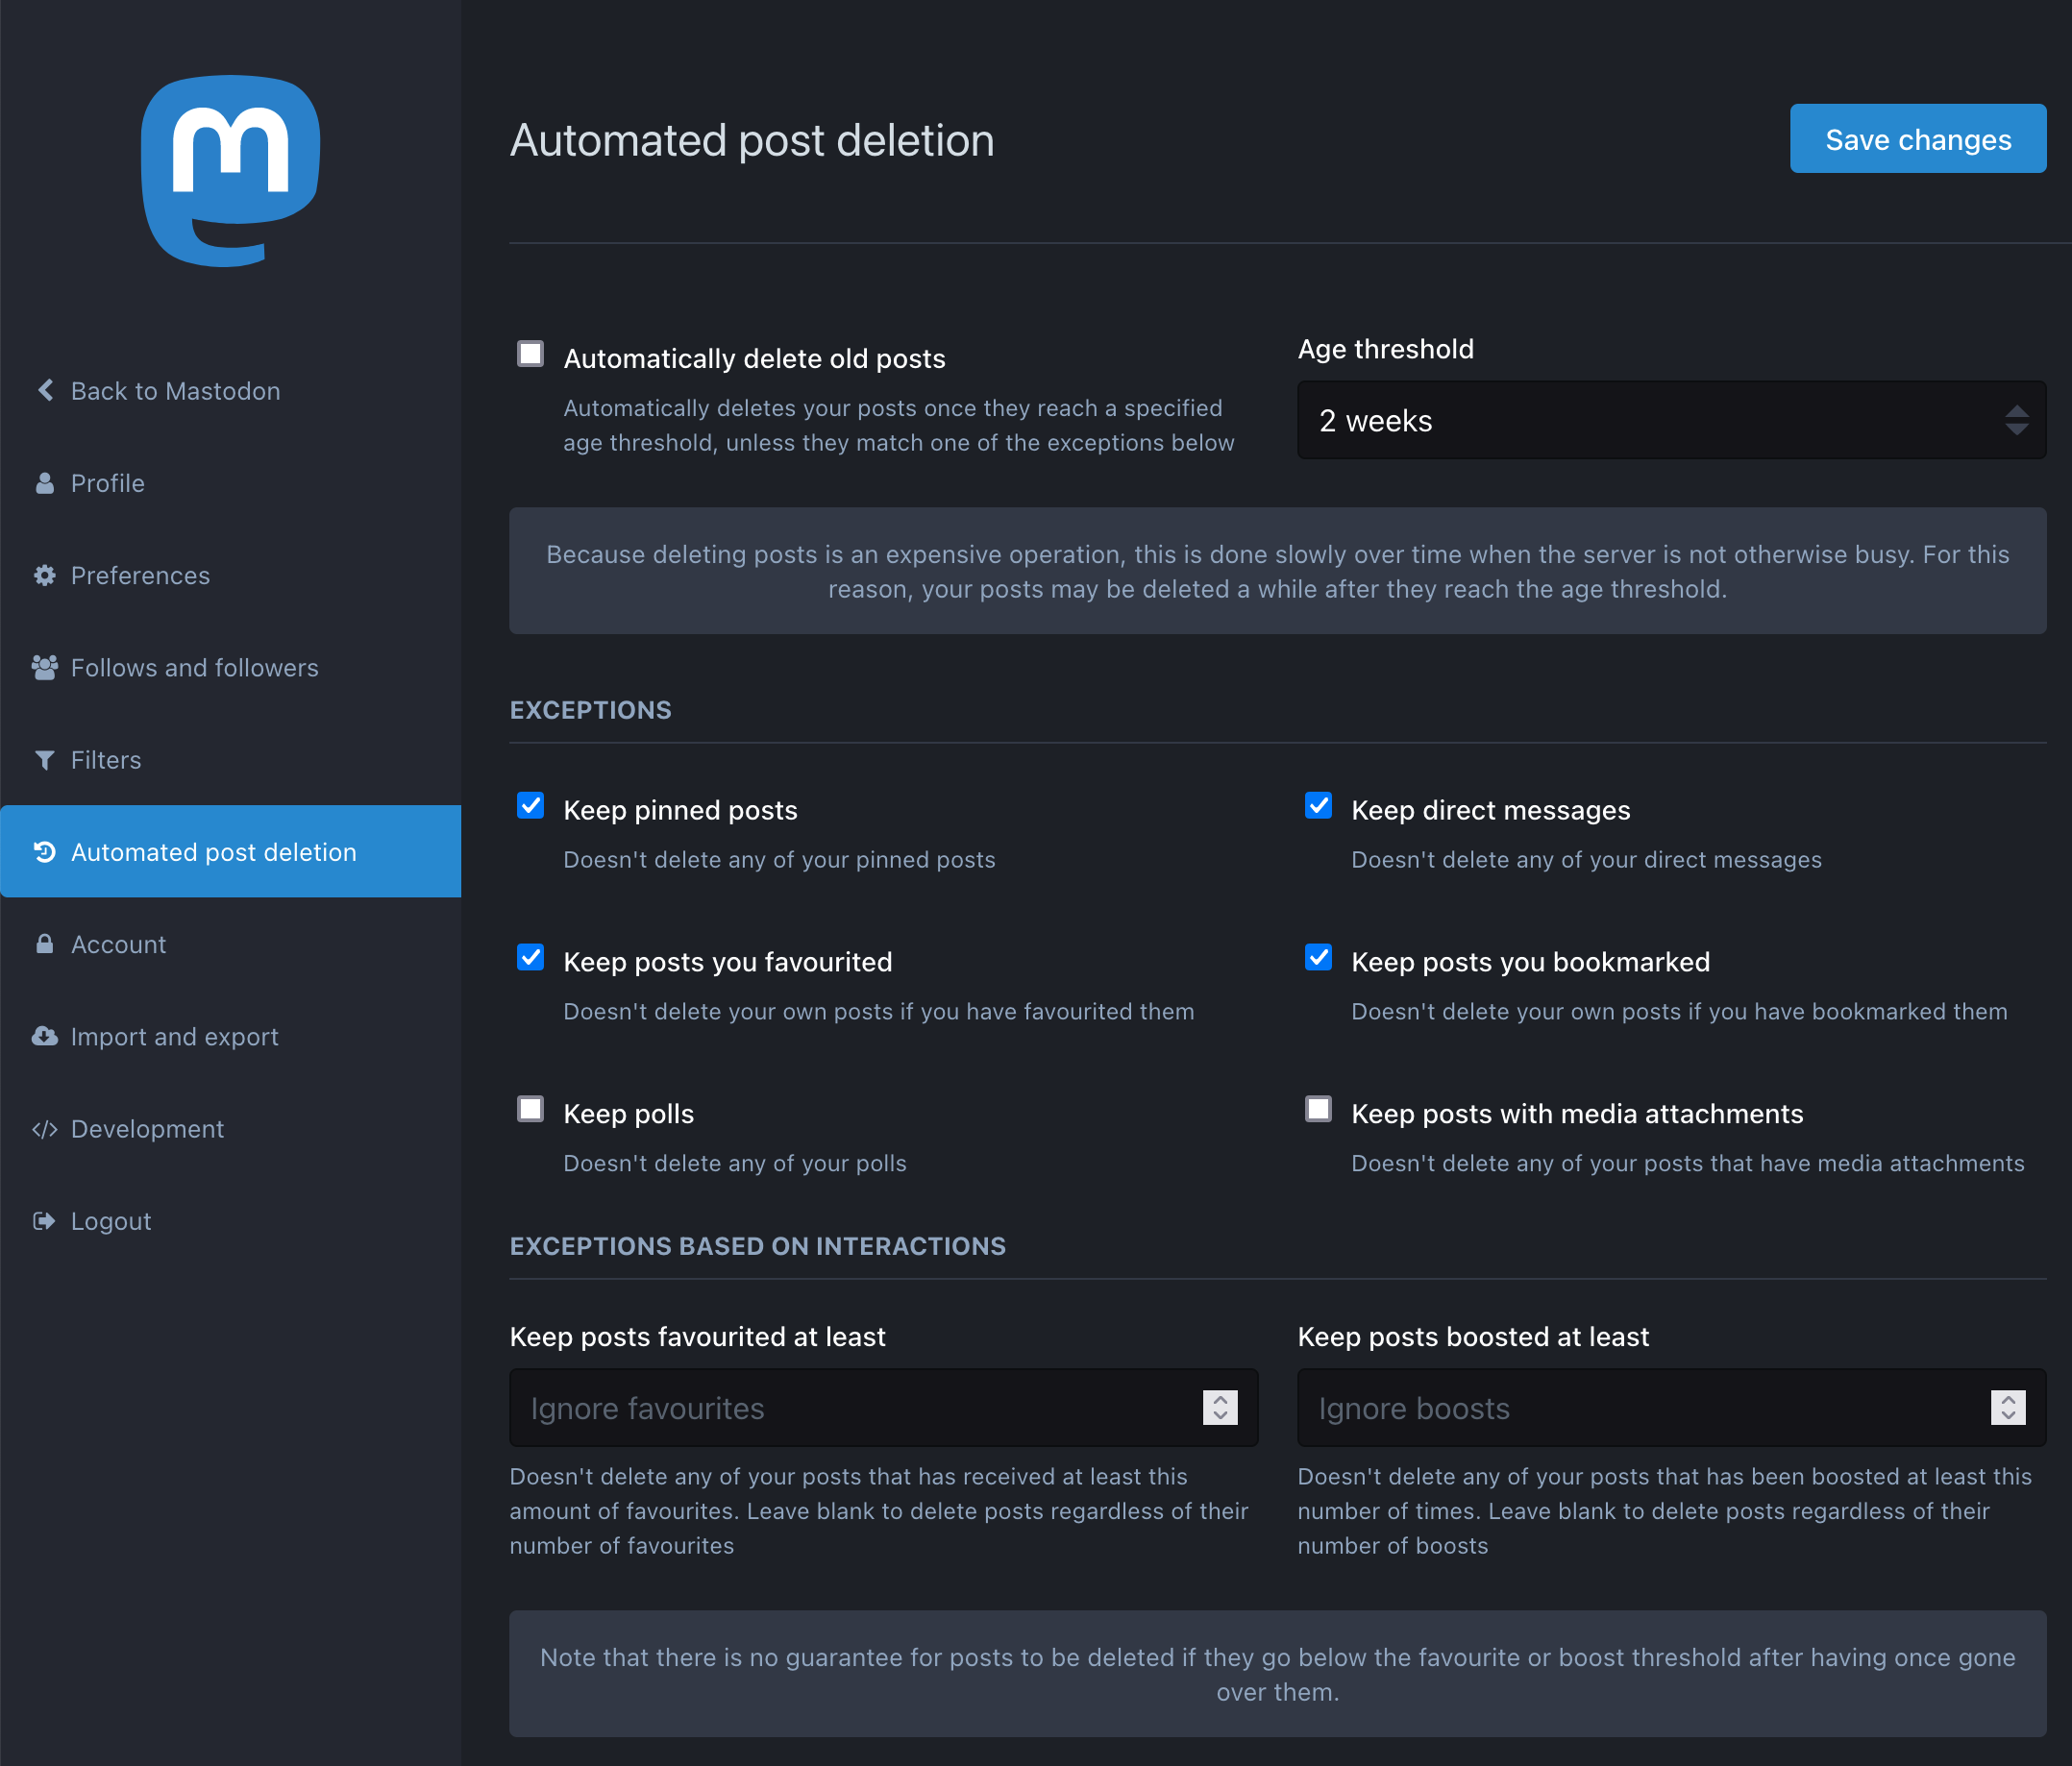 Mastodon settings menu with automated deletion age threshold setting and list of exception options like pinned posts and posts favorited by x people.